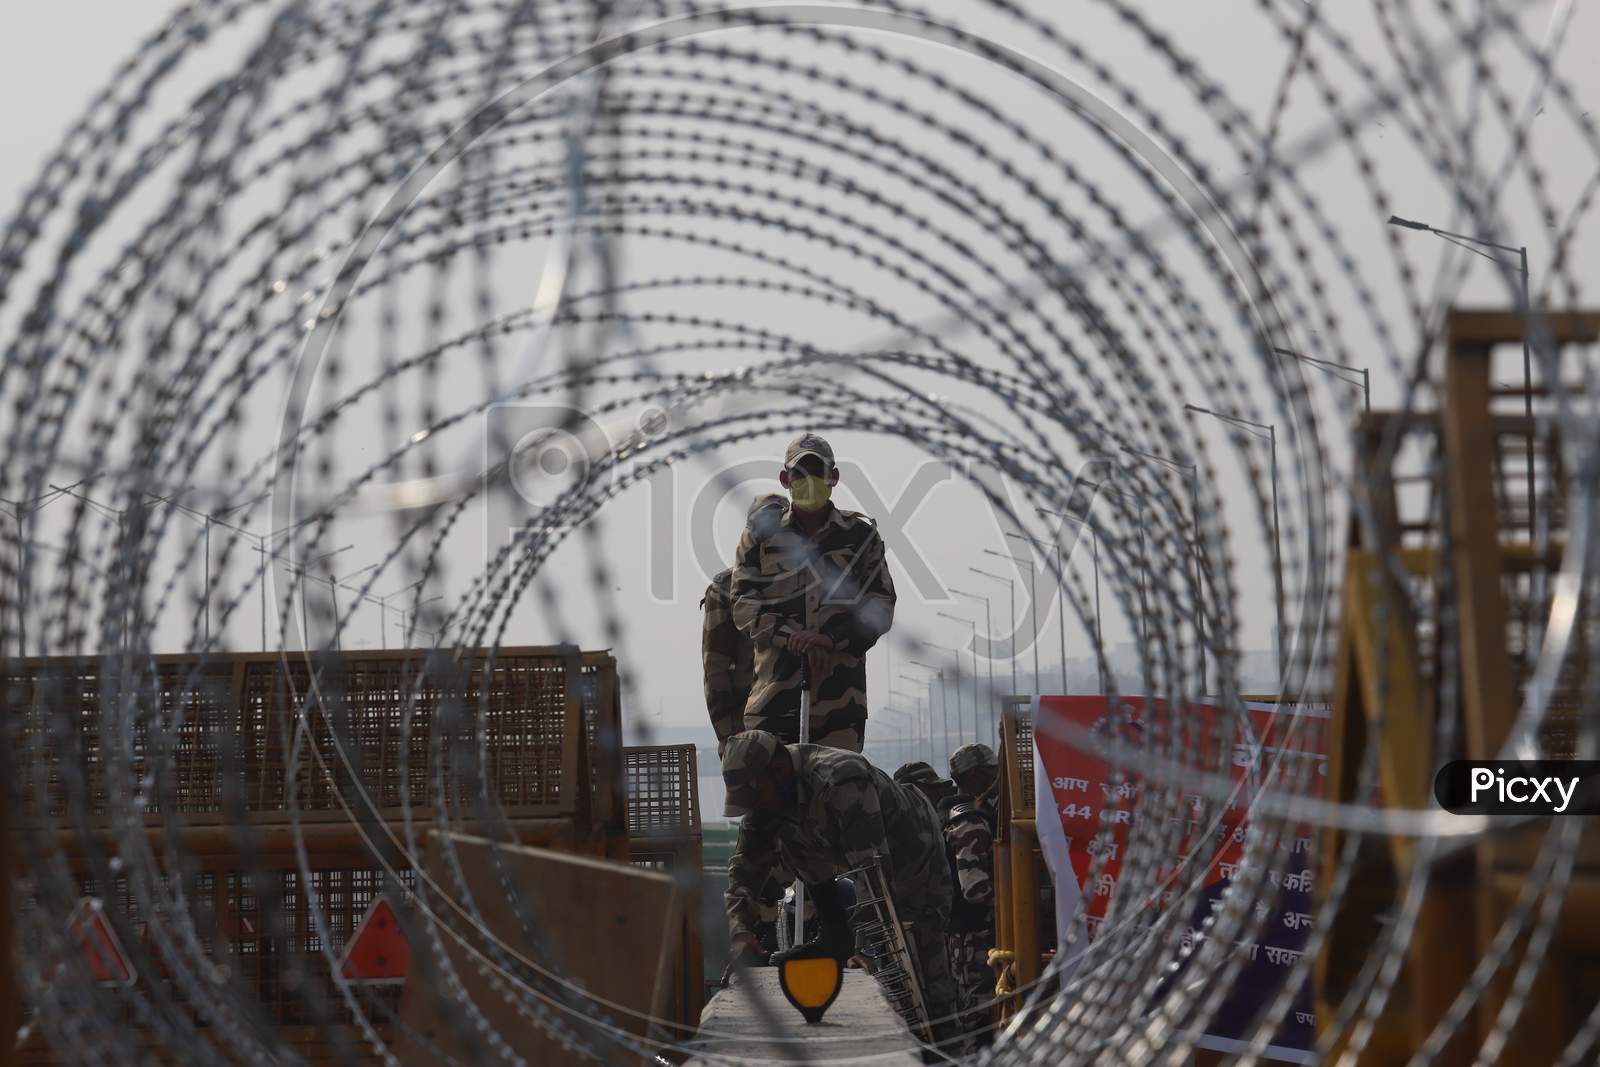 Barbed wires are seen on police barricades along a blocked highway as farmers continue their protest against the central government's recent agricultural reforms at Delhi-Uttar Pradesh border in Ghaziabad on February 2, 2021.